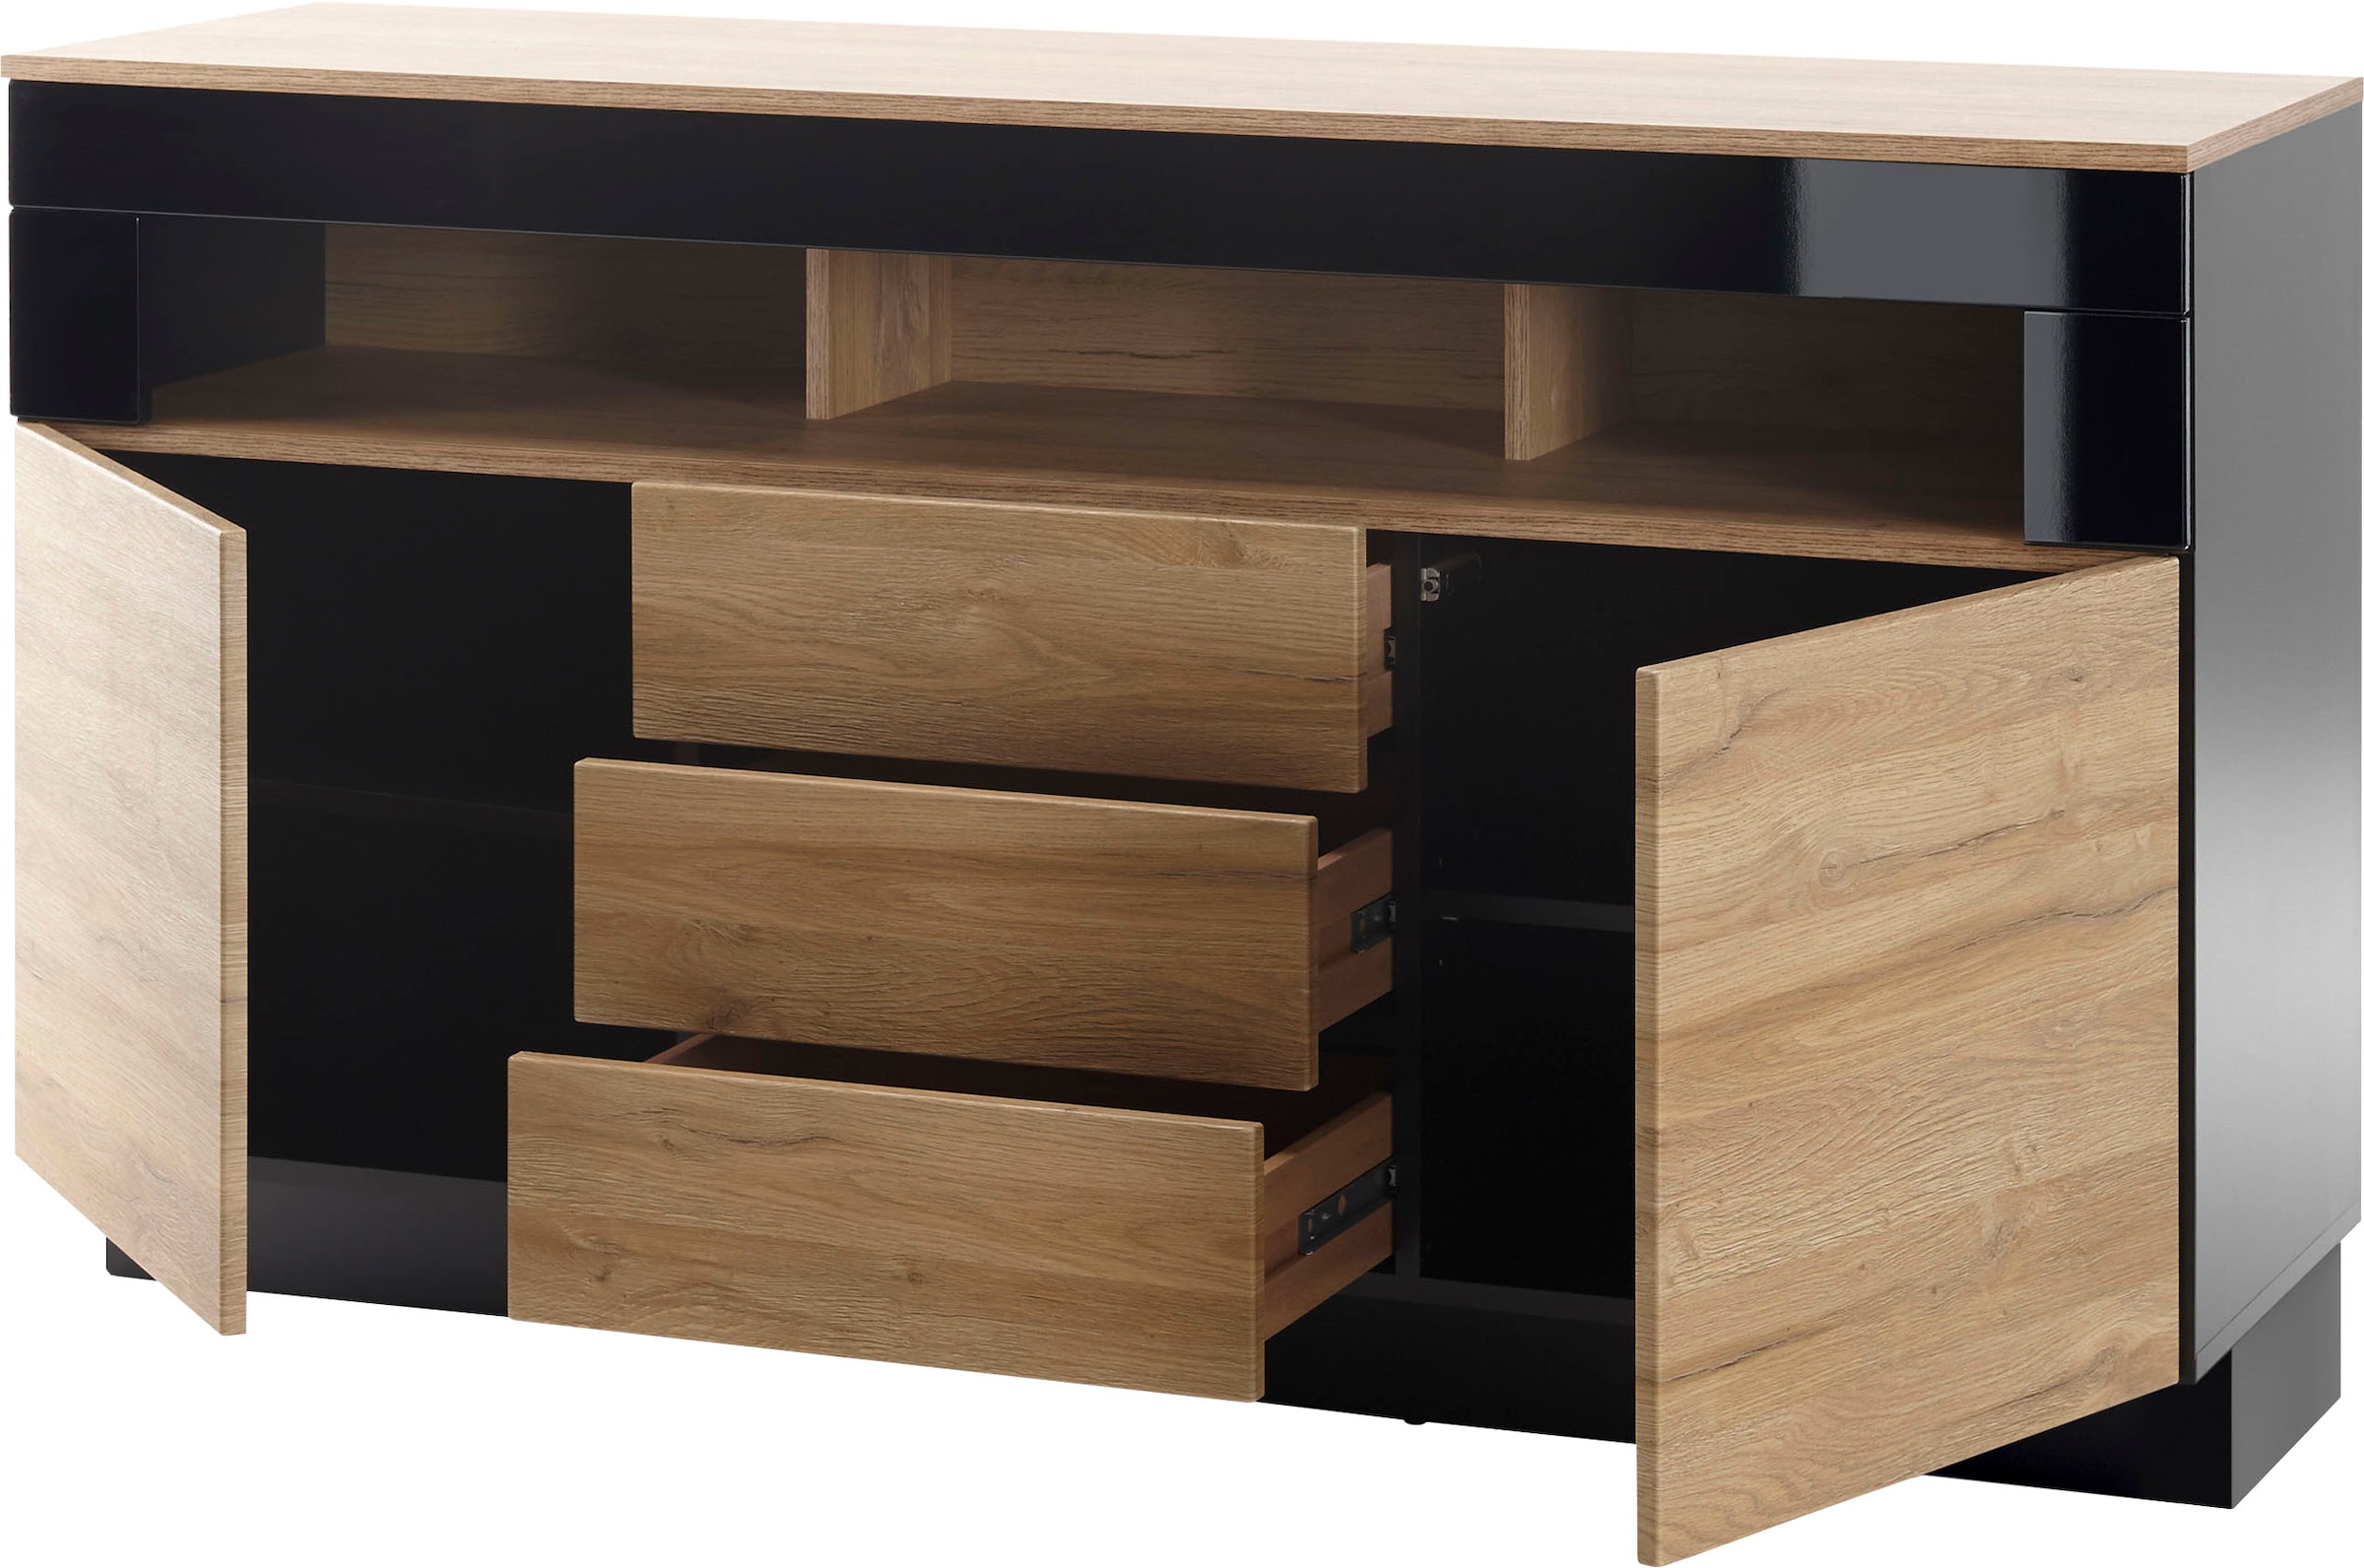 150 Breite Sideboard »Cayman«, Trouver sur of Style ca. cm Places